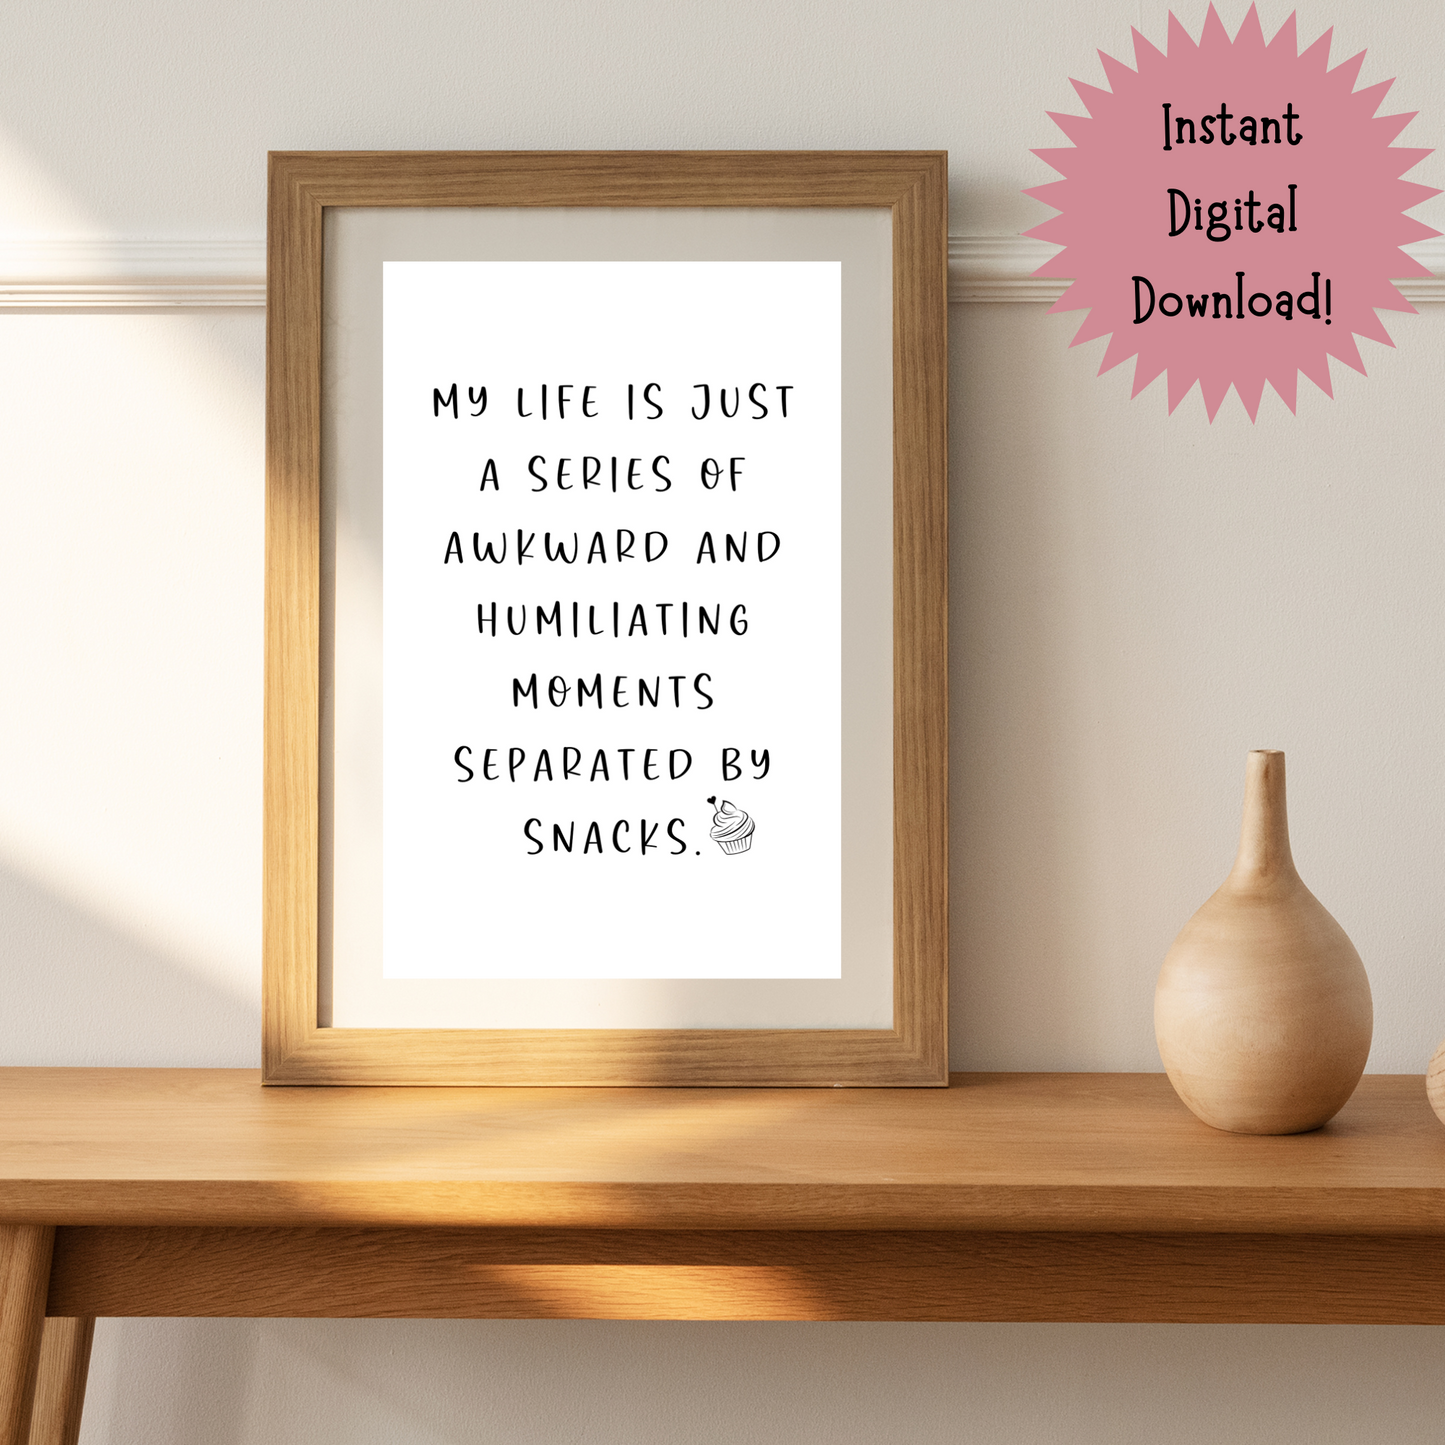 My Life Is Just a Series of Awkward and Humiliating Moments Separted by Snacks  - Digital Download